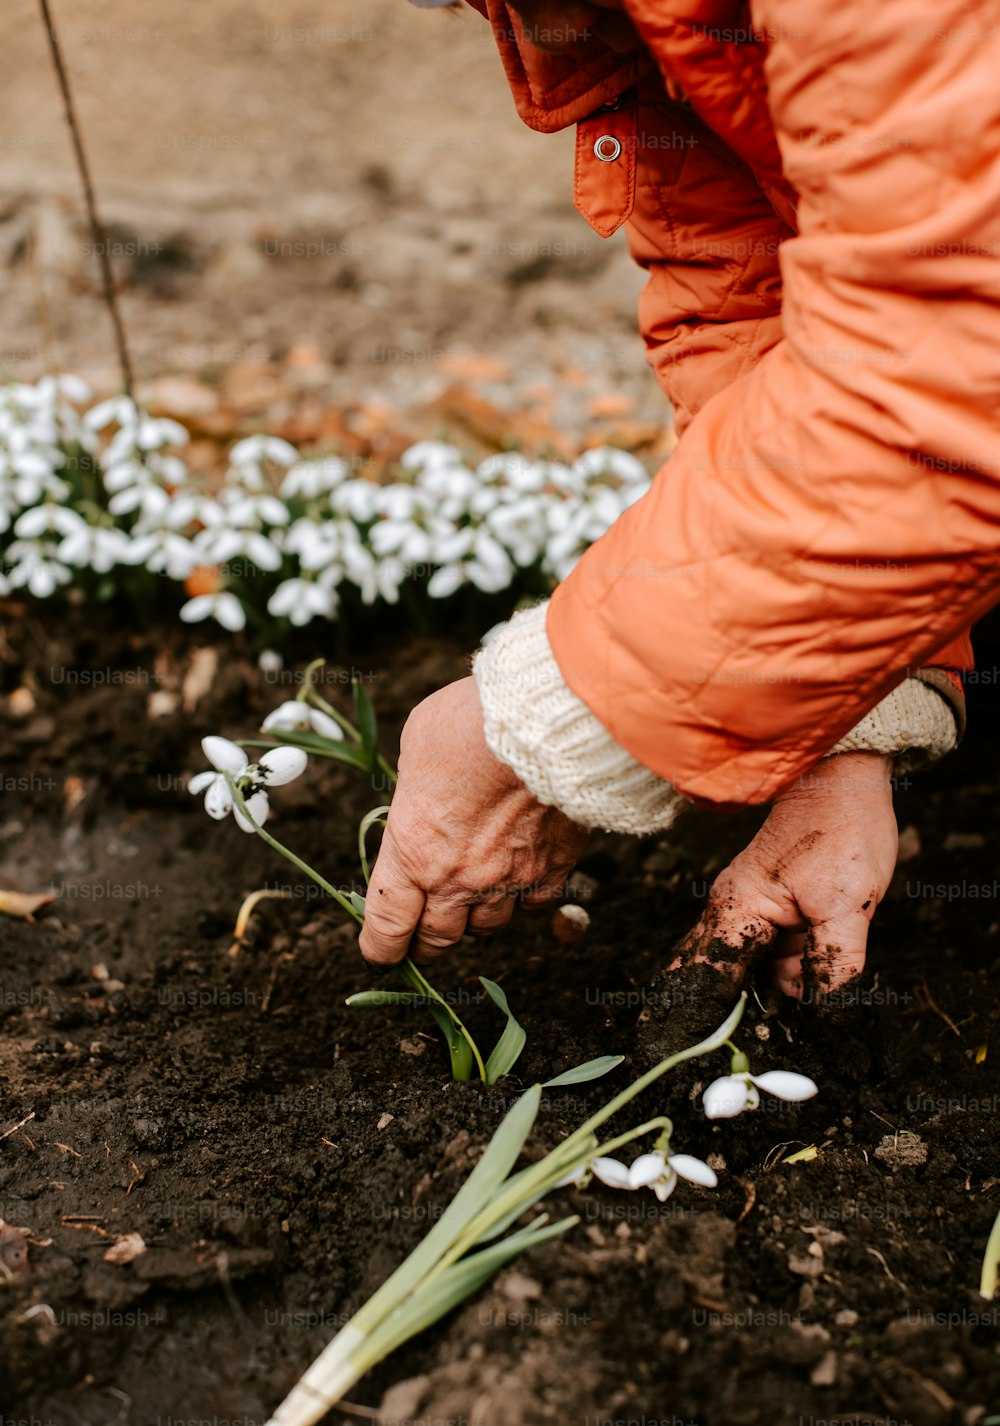 a person in an orange jacket is planting flowers